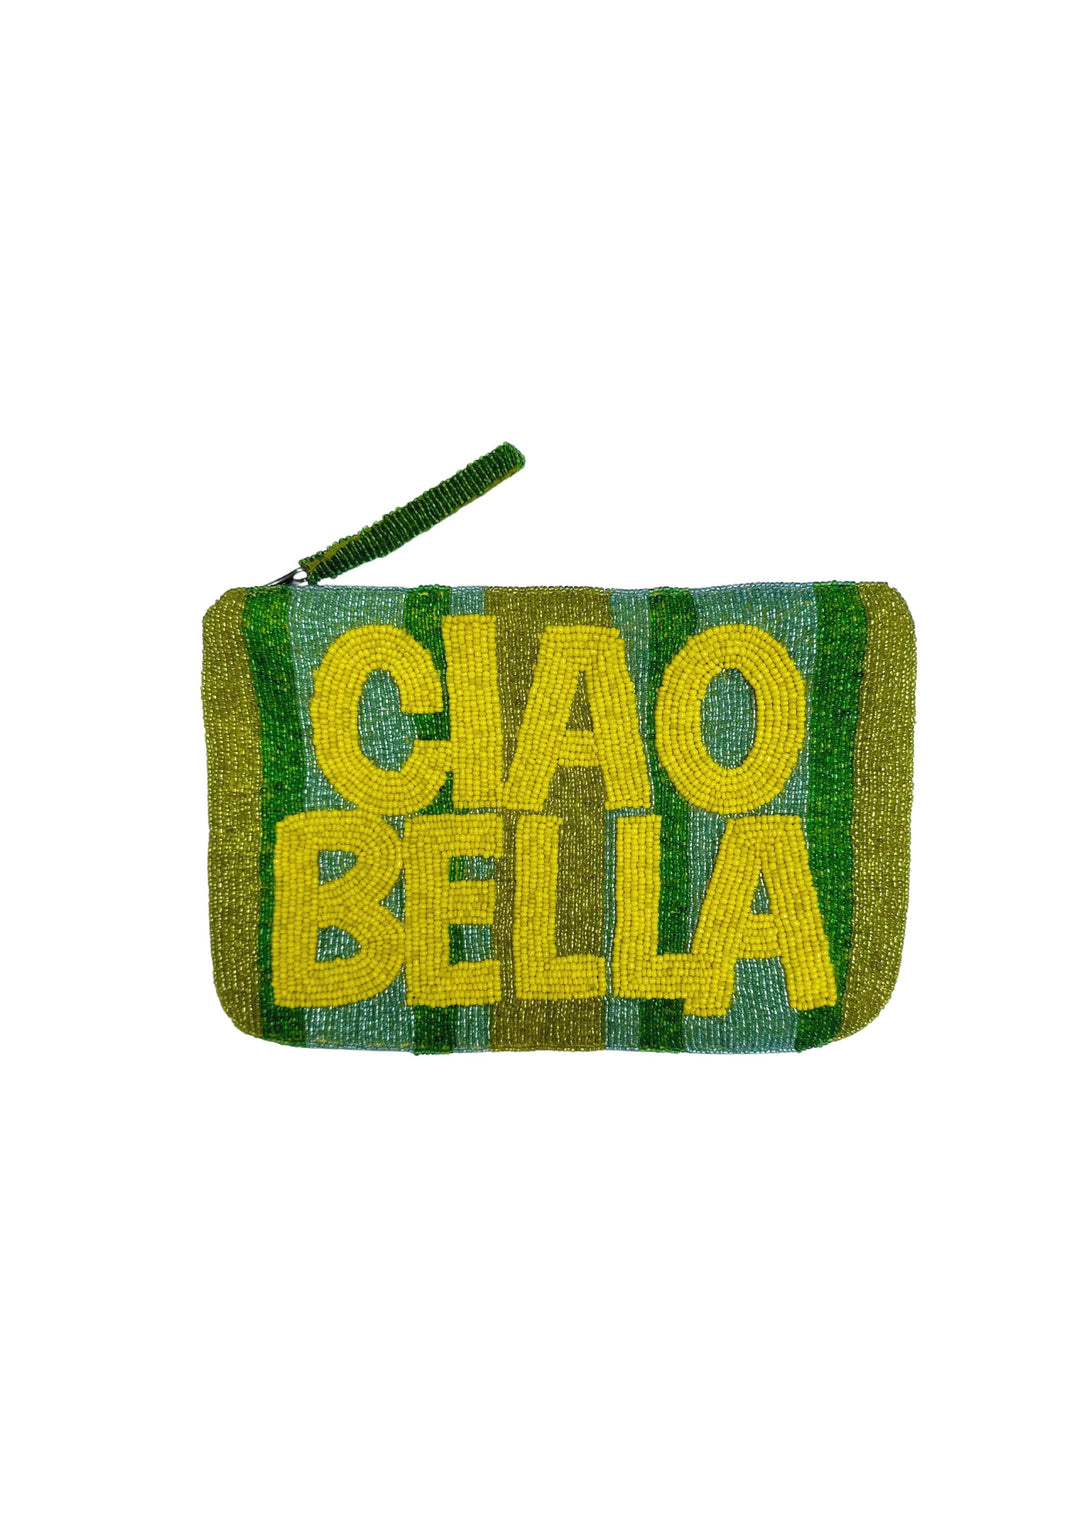 The Jacksons | Ciao Bella Yellow Green Stripes Handmade Beaded Clutch